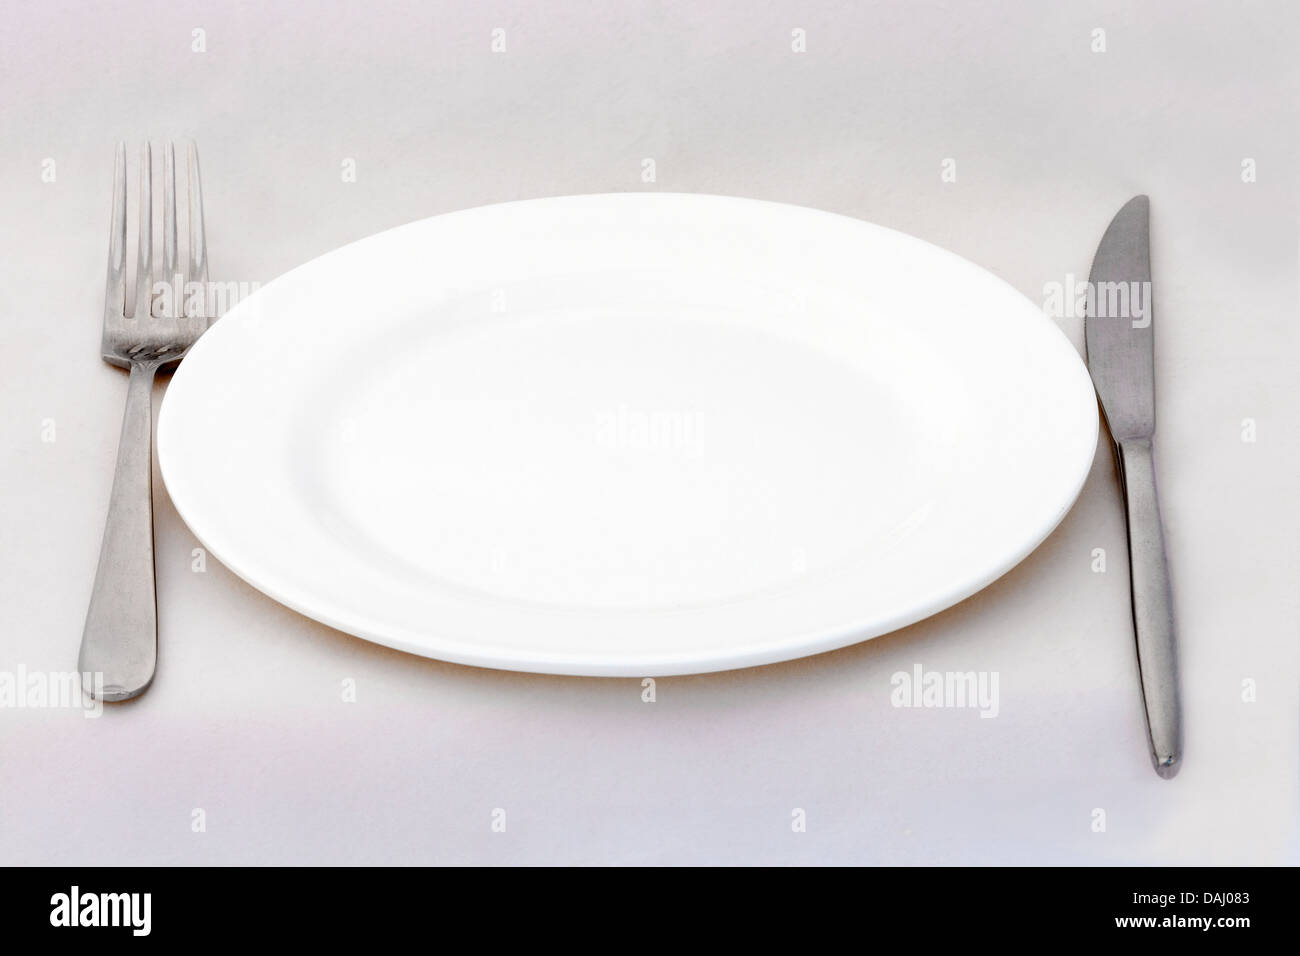 Dining plate with fork and knife on white surface Stock Photo